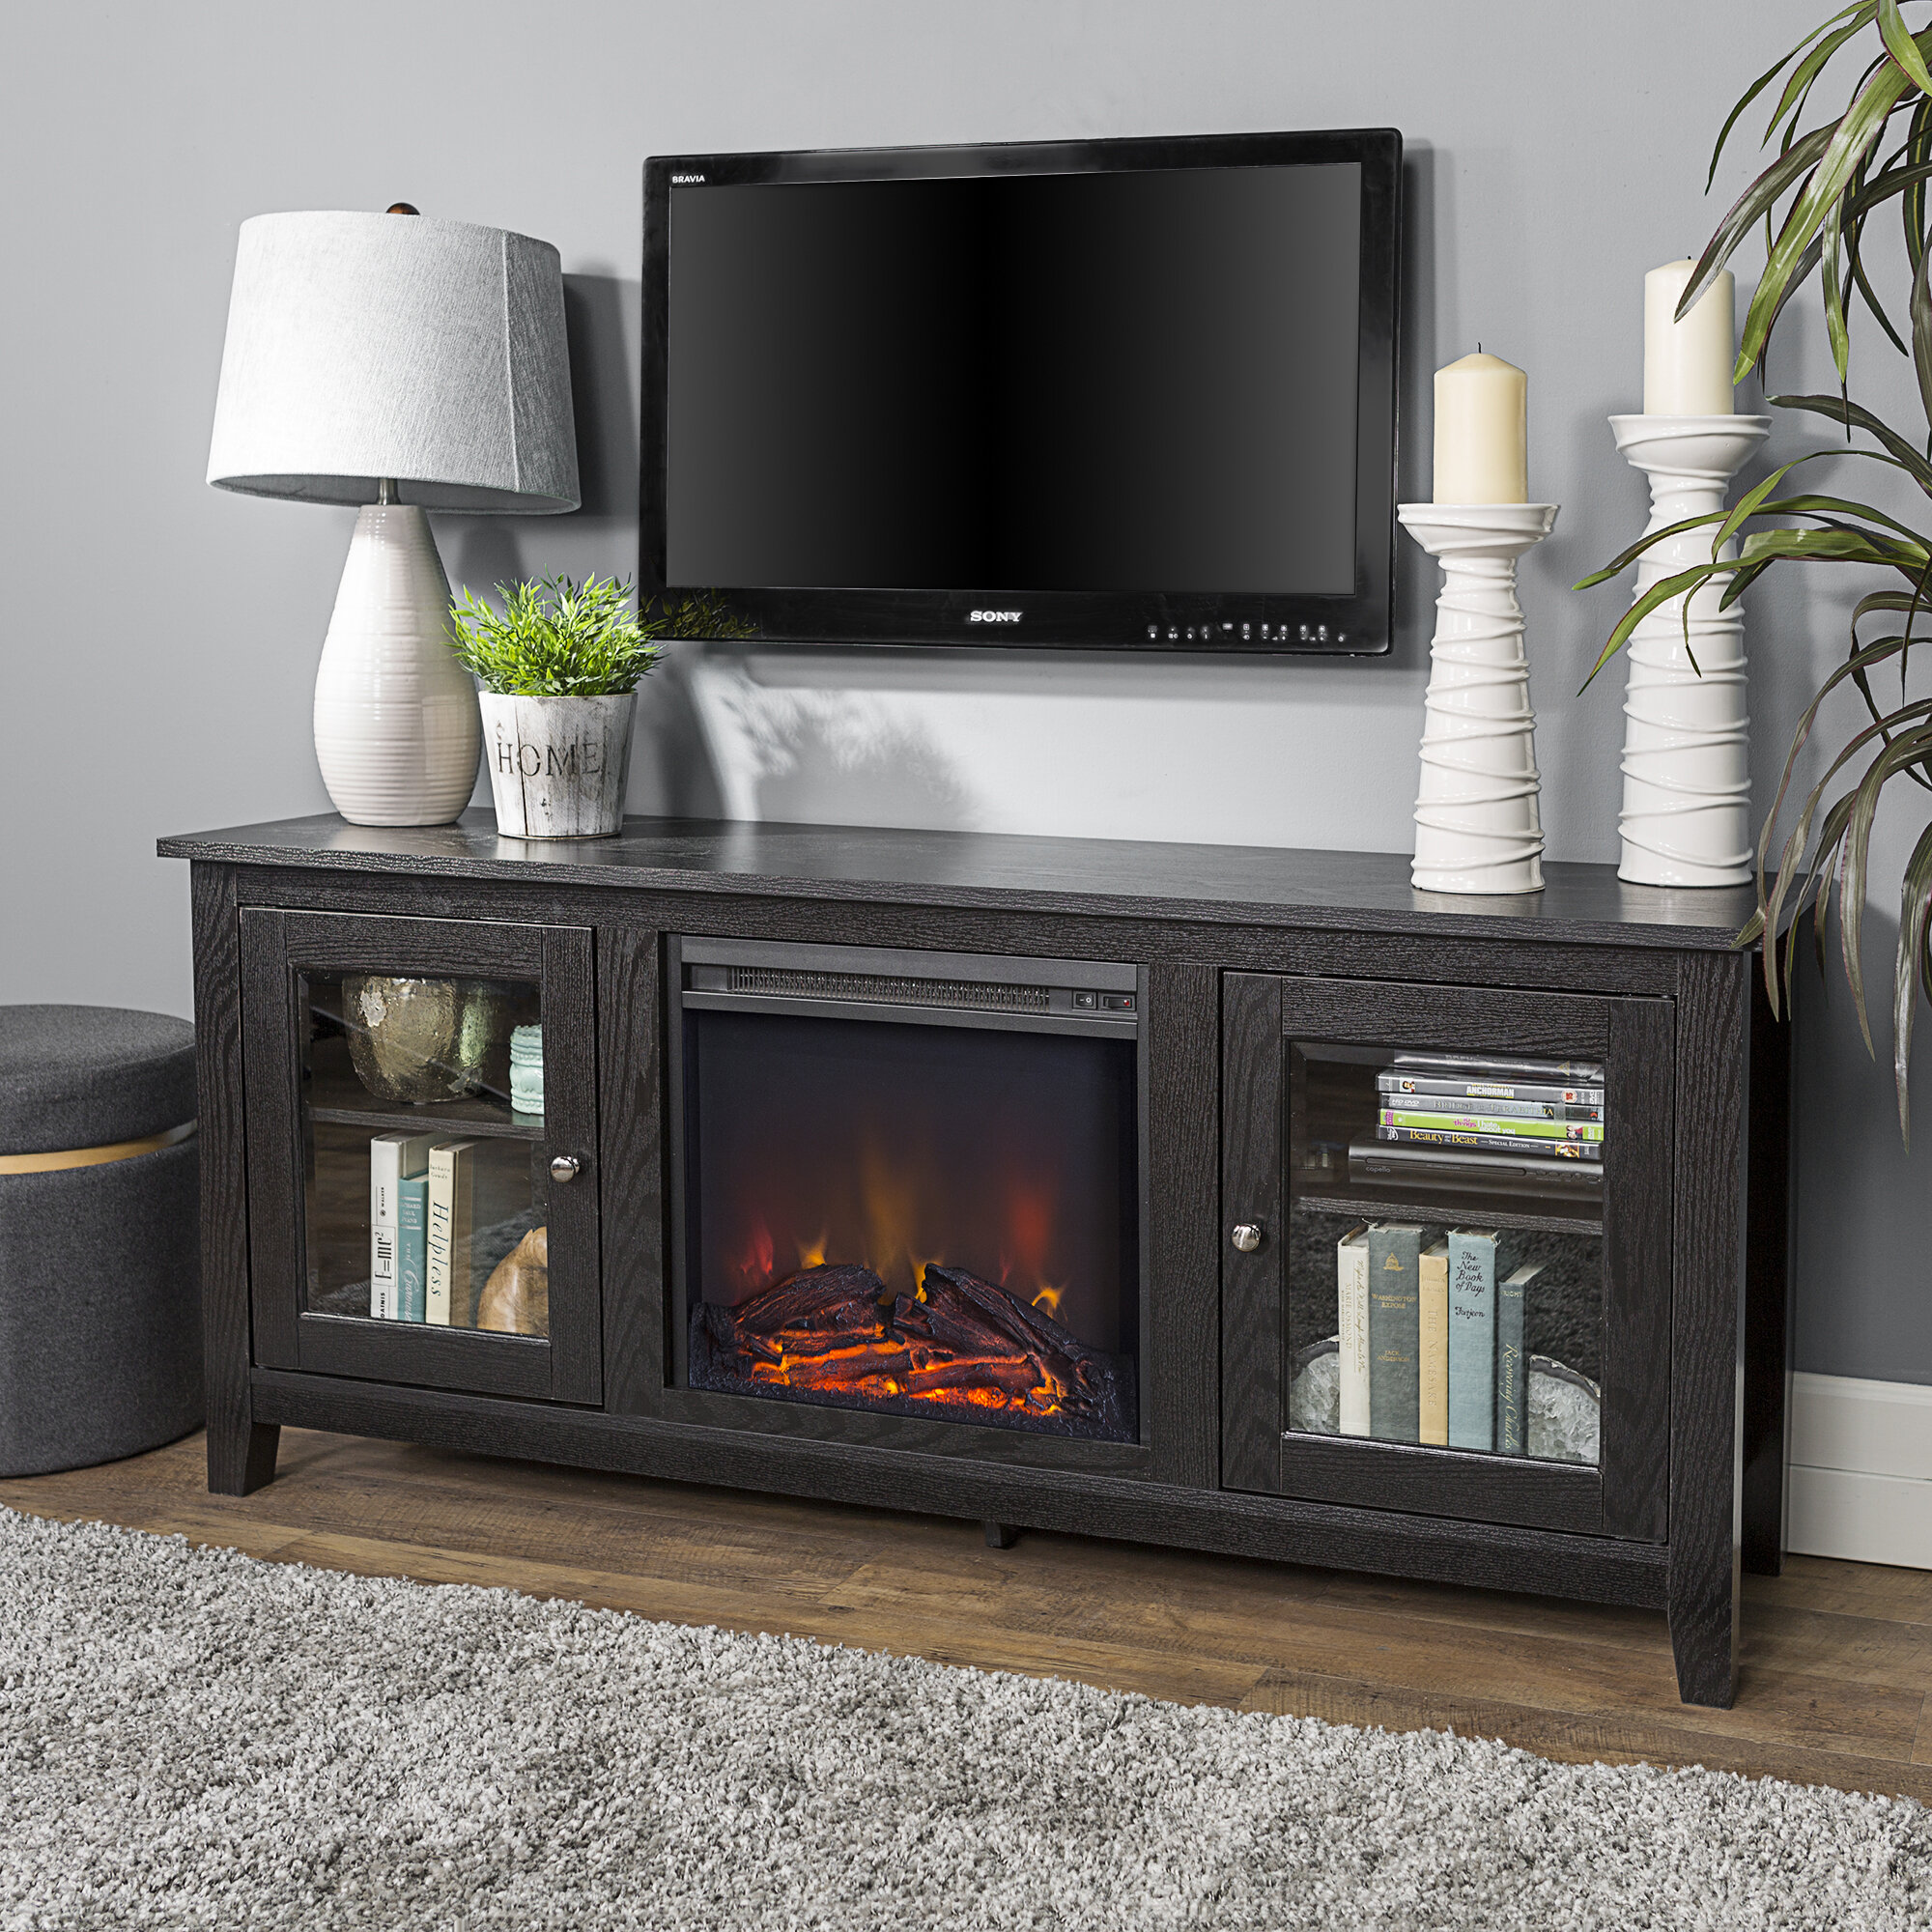 Black Fireplace TV Stands & Entertainment Centers You'll Love in 2021